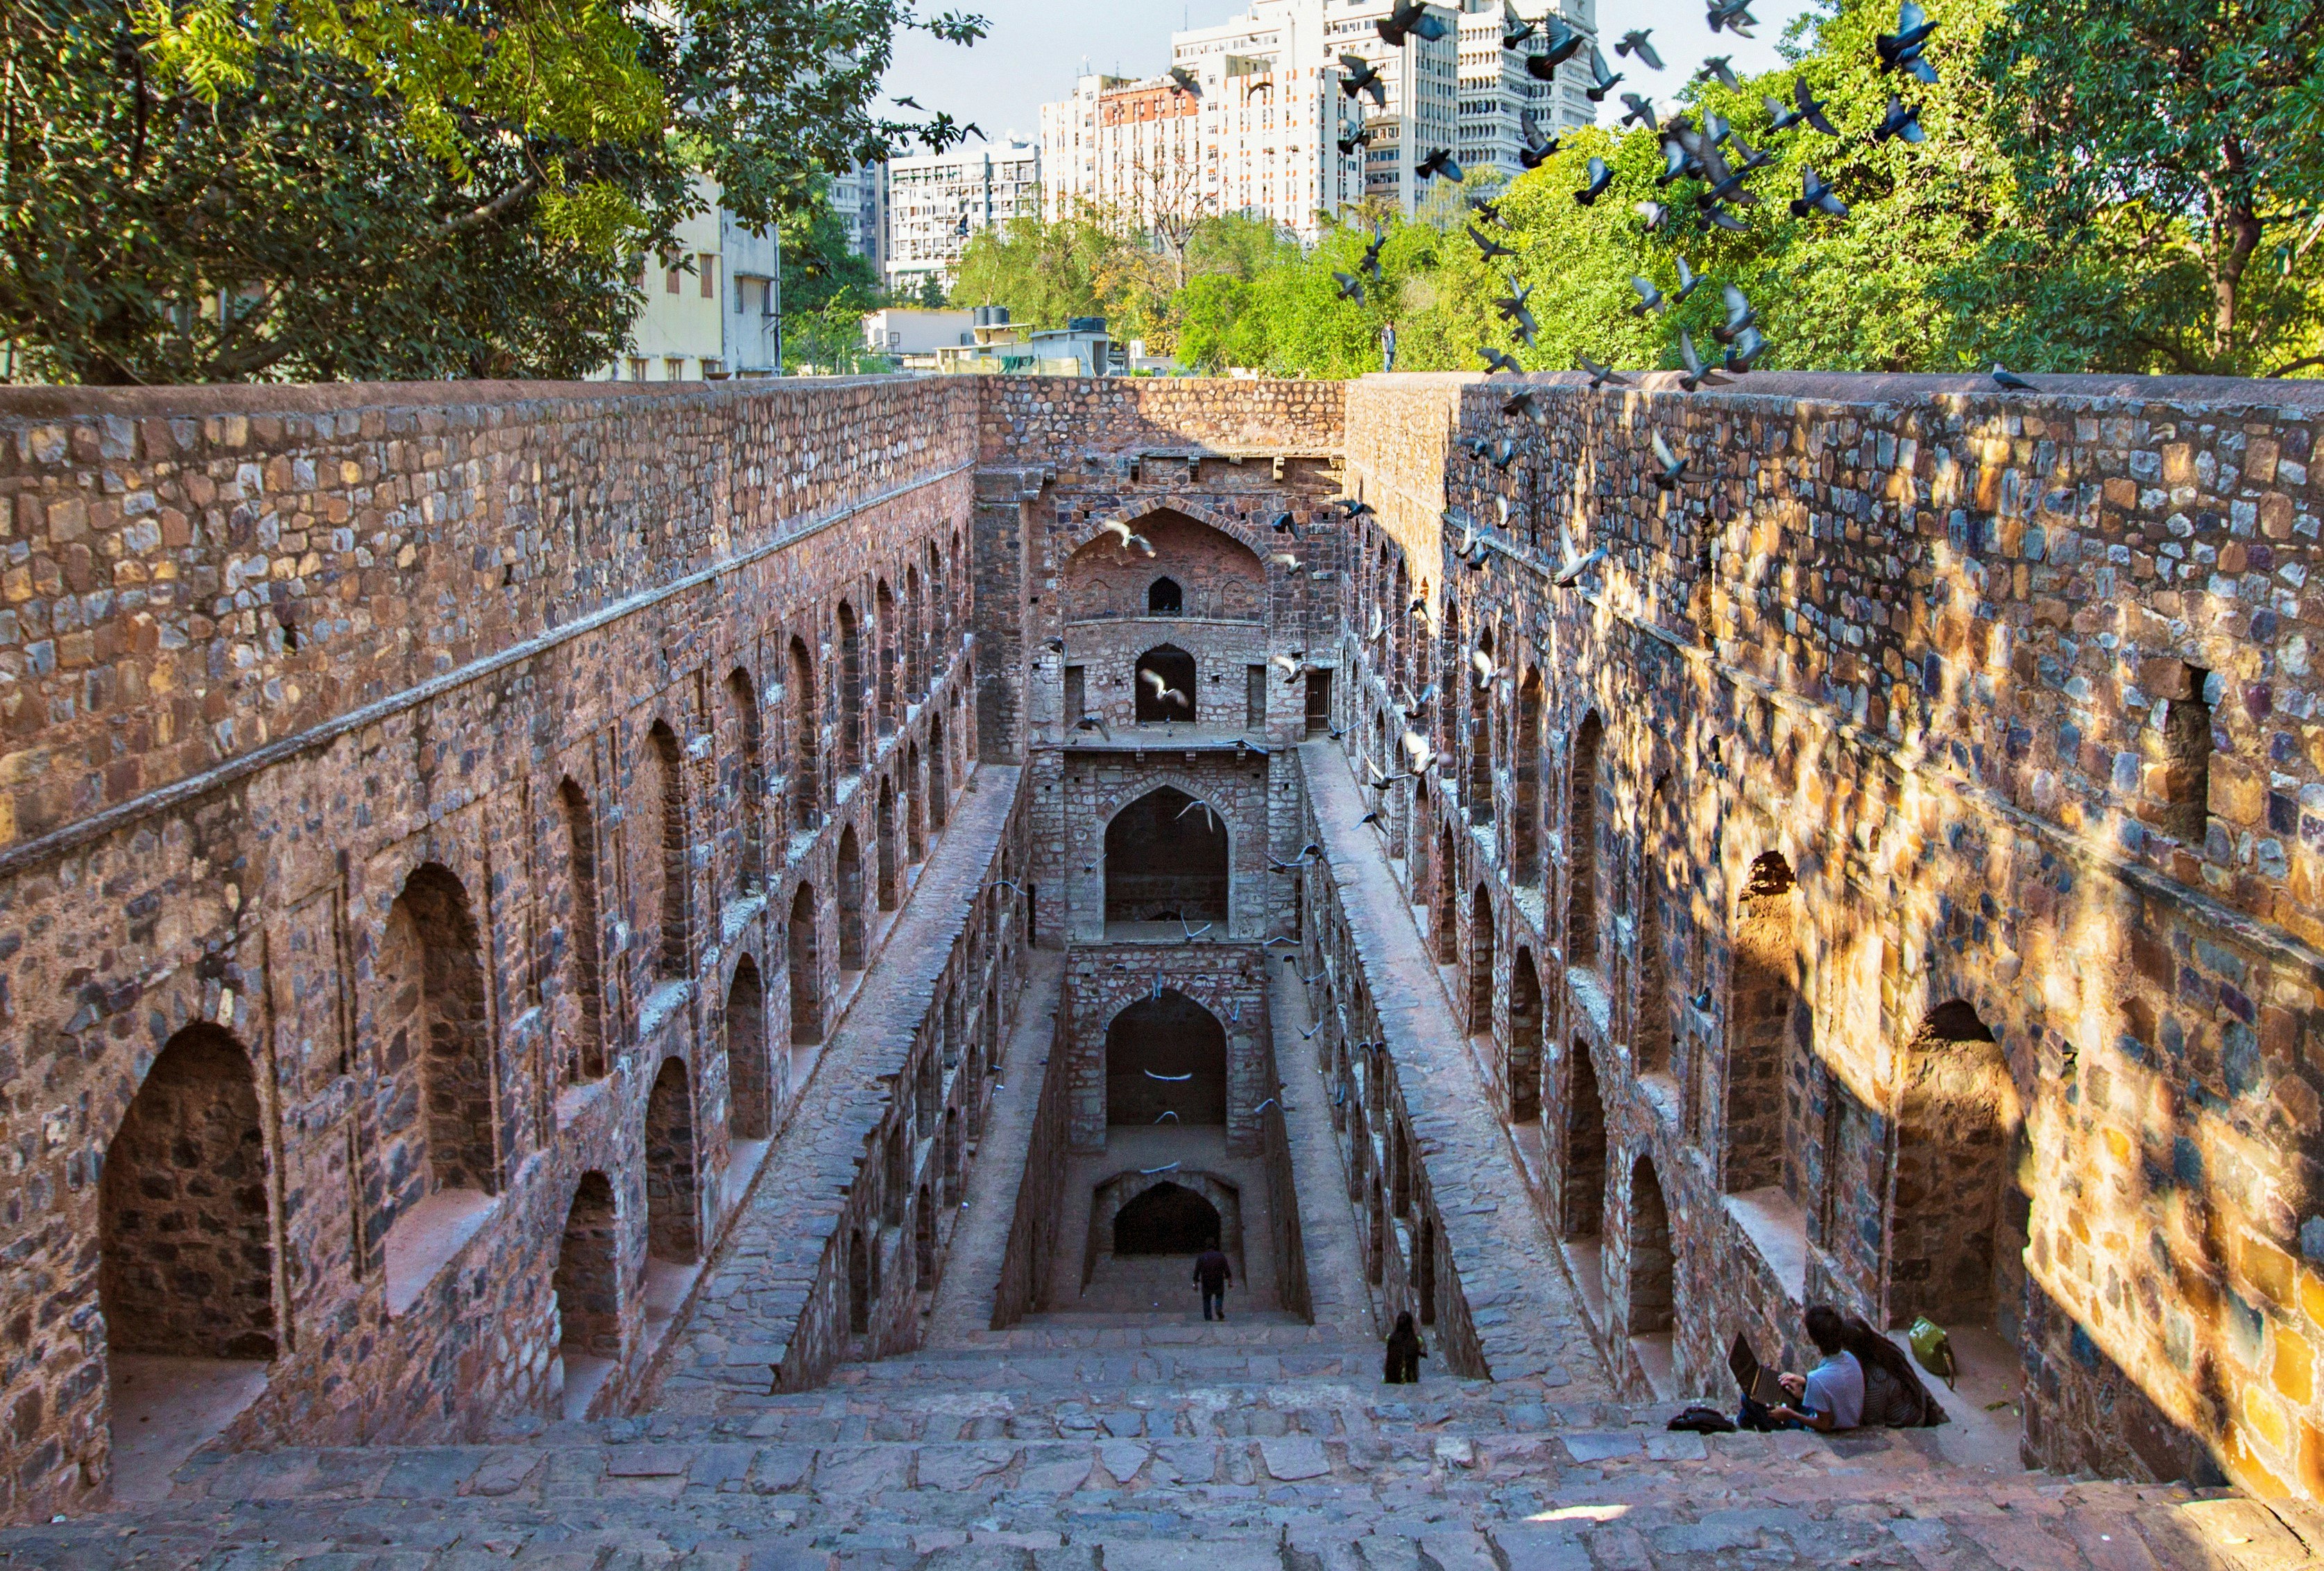 The stone Agrasen Ki Baoli stepwell in Delhi. A staircase descends downwards, enclosed by a vertical wall on all other sides, which are adorned with shallow arches. A few people sit on the steps, while, back on ground level, some trees and buildings are visible around the stepwell.